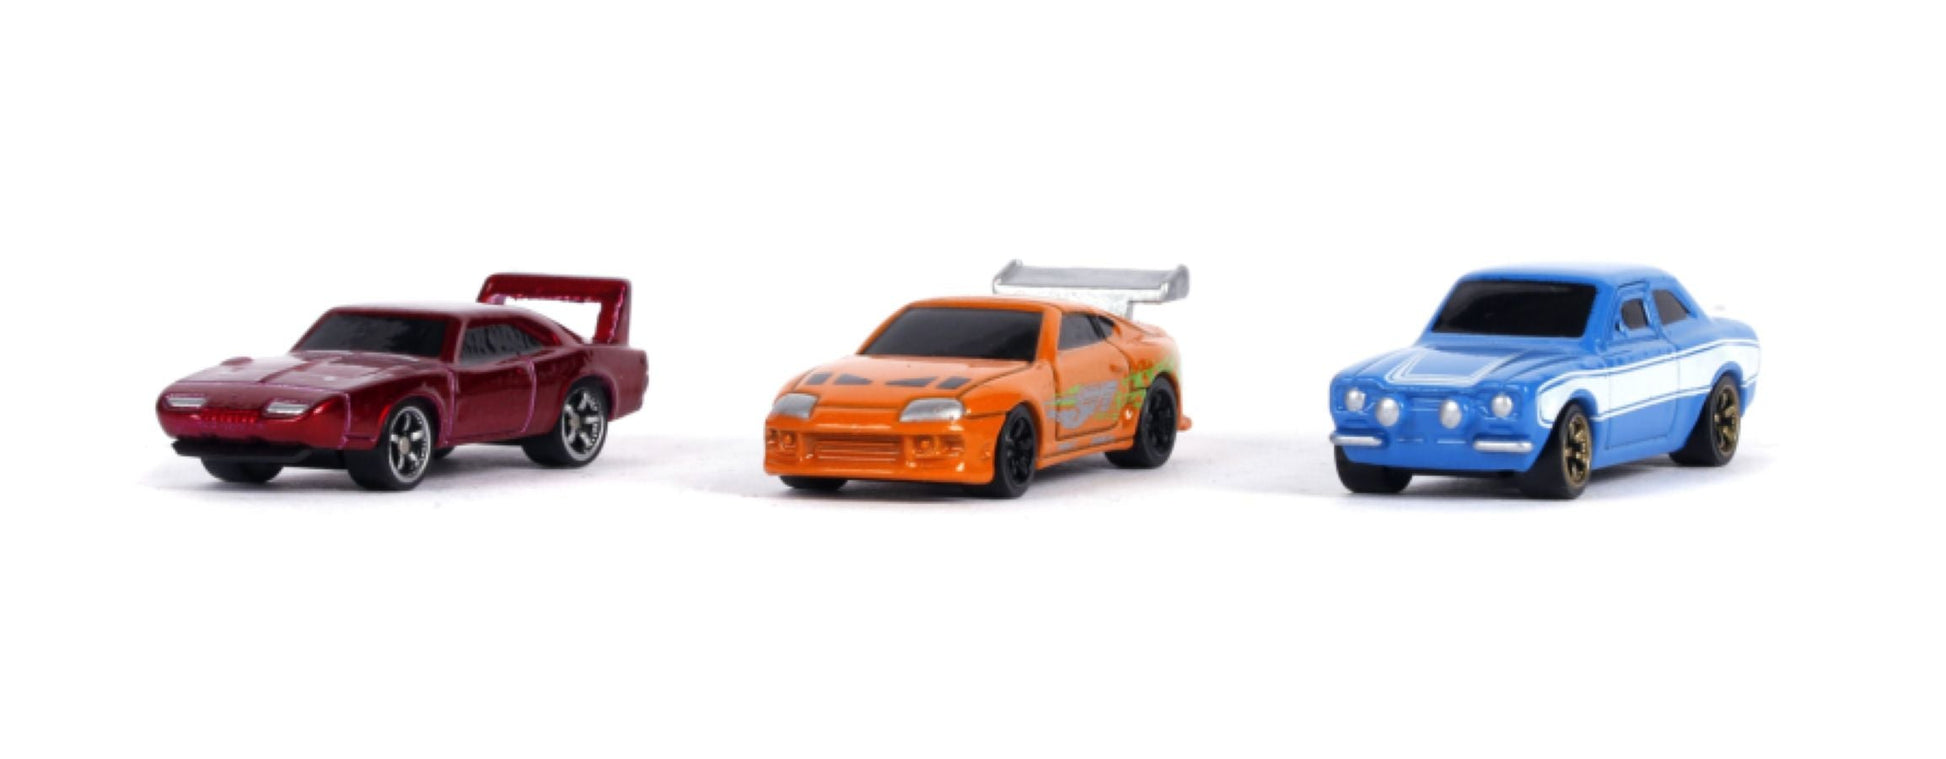 Fast & Furious - Nano Hollywood Rides Vehicle Assortment - Ozzie Collectables